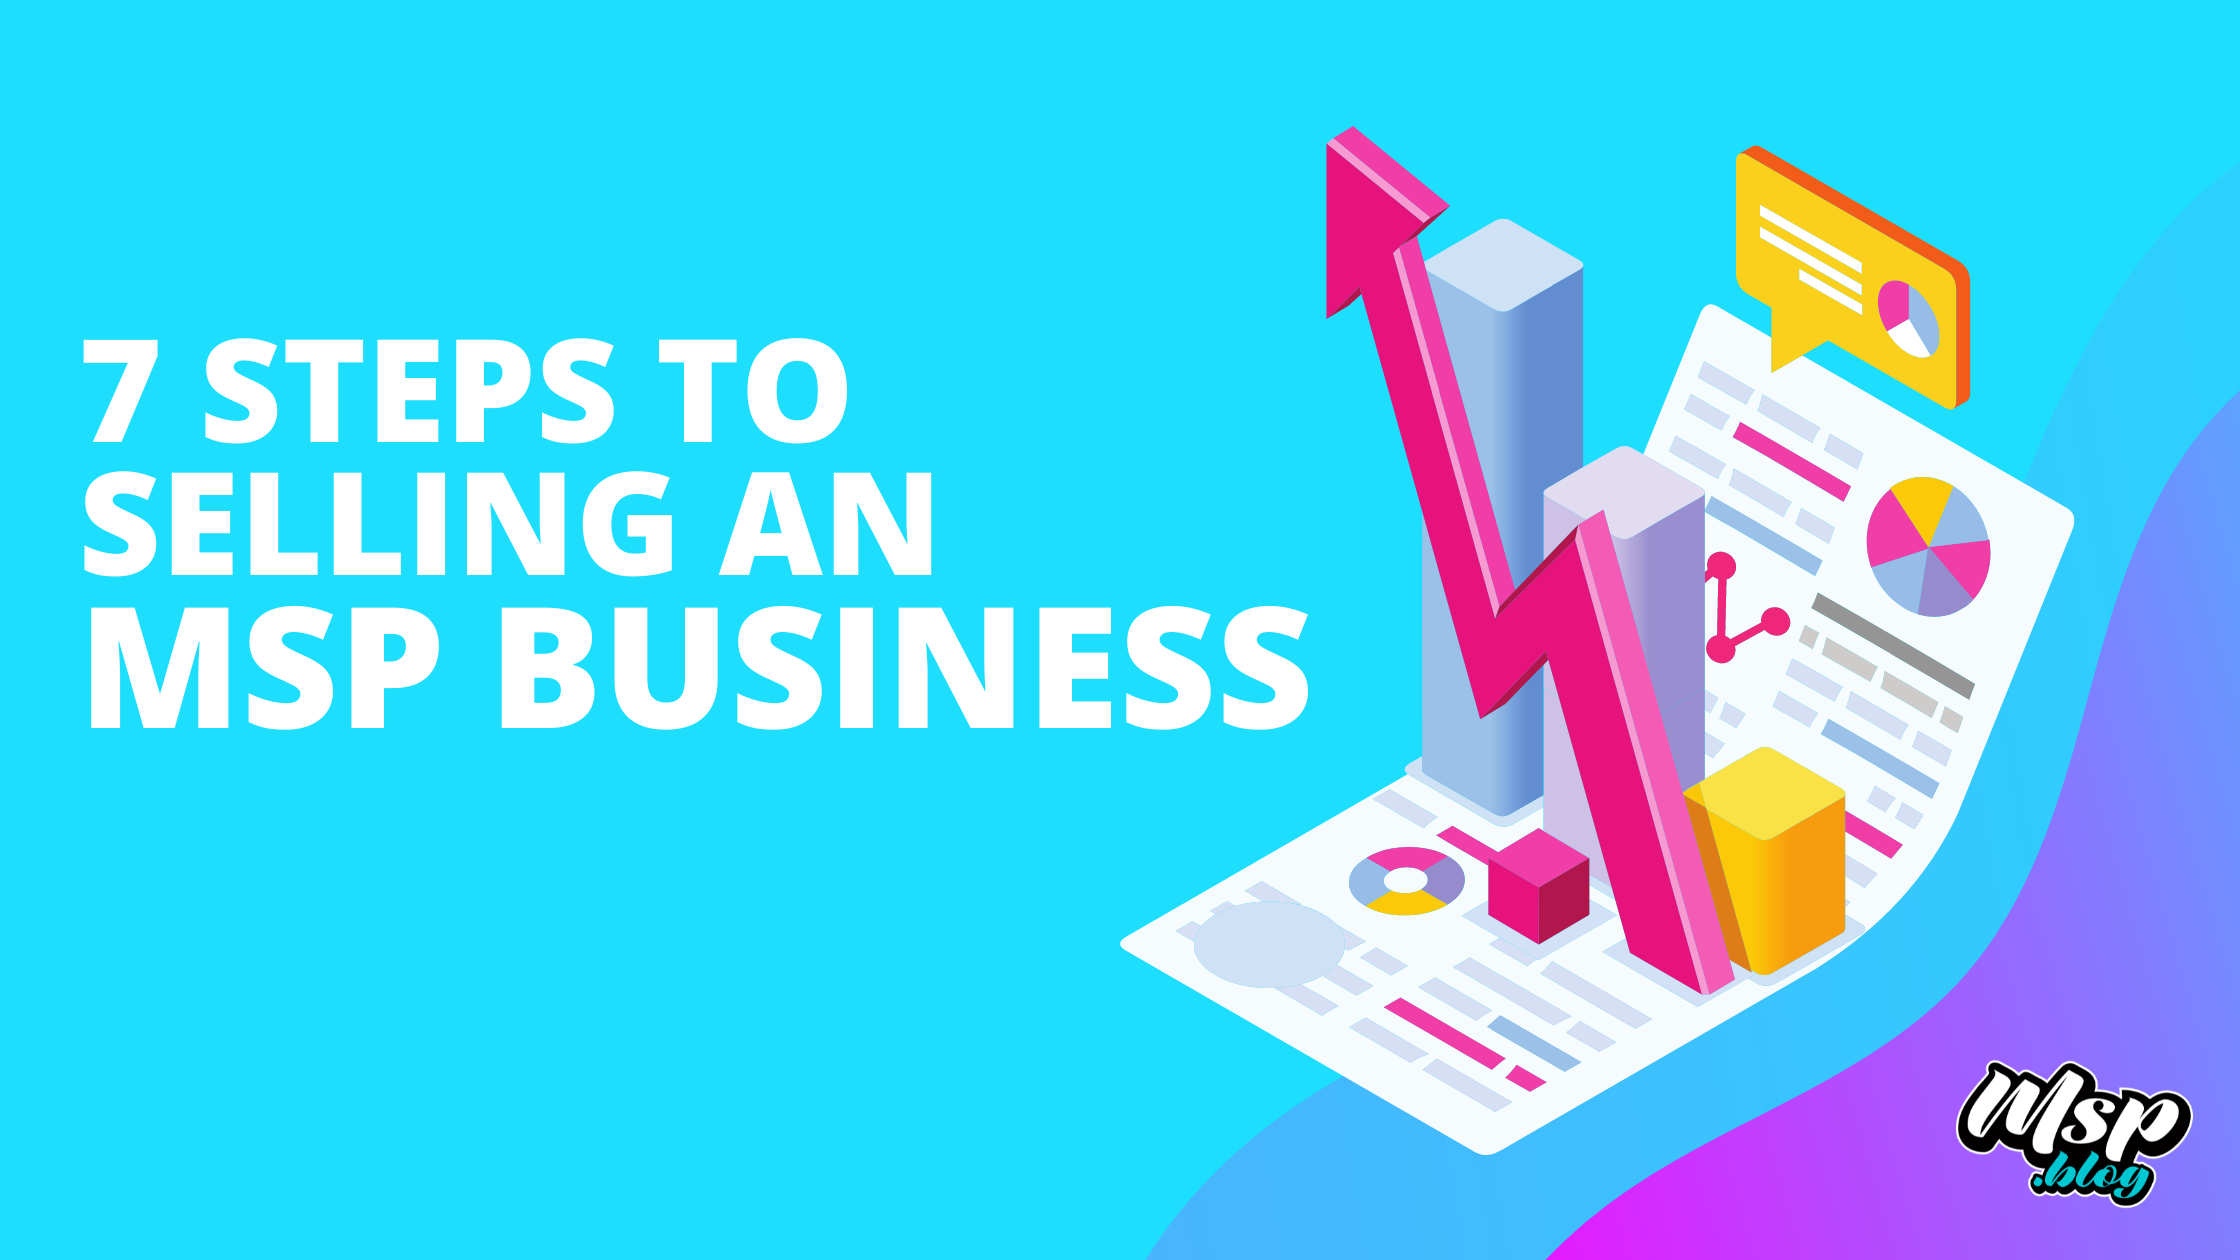 How to sell an MSP business and the steps involved